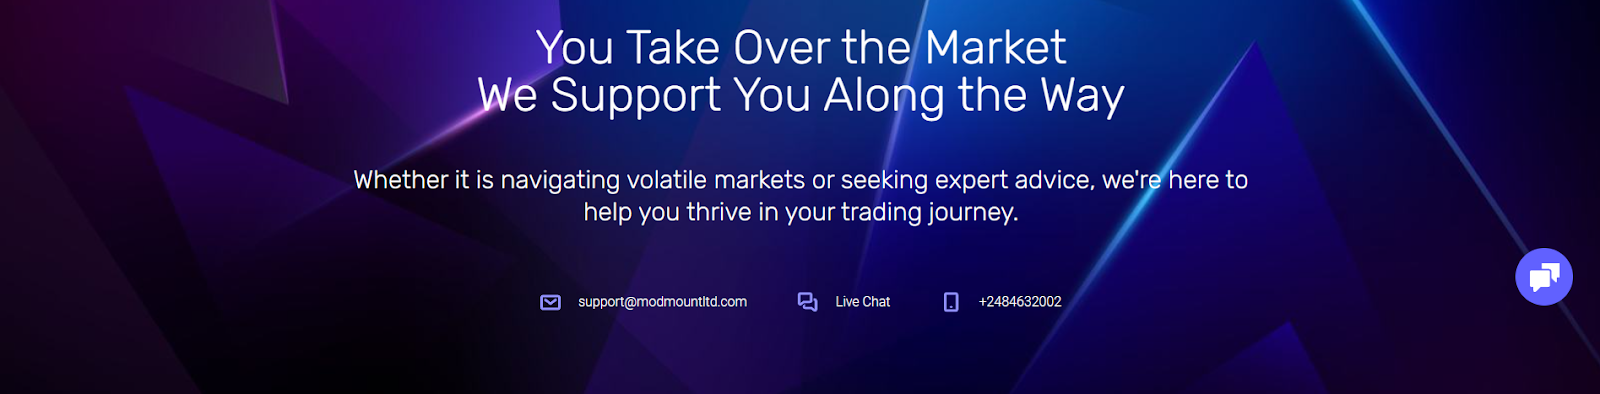 Modmount is a legit and reliable forex broker that offers contact support to its clients